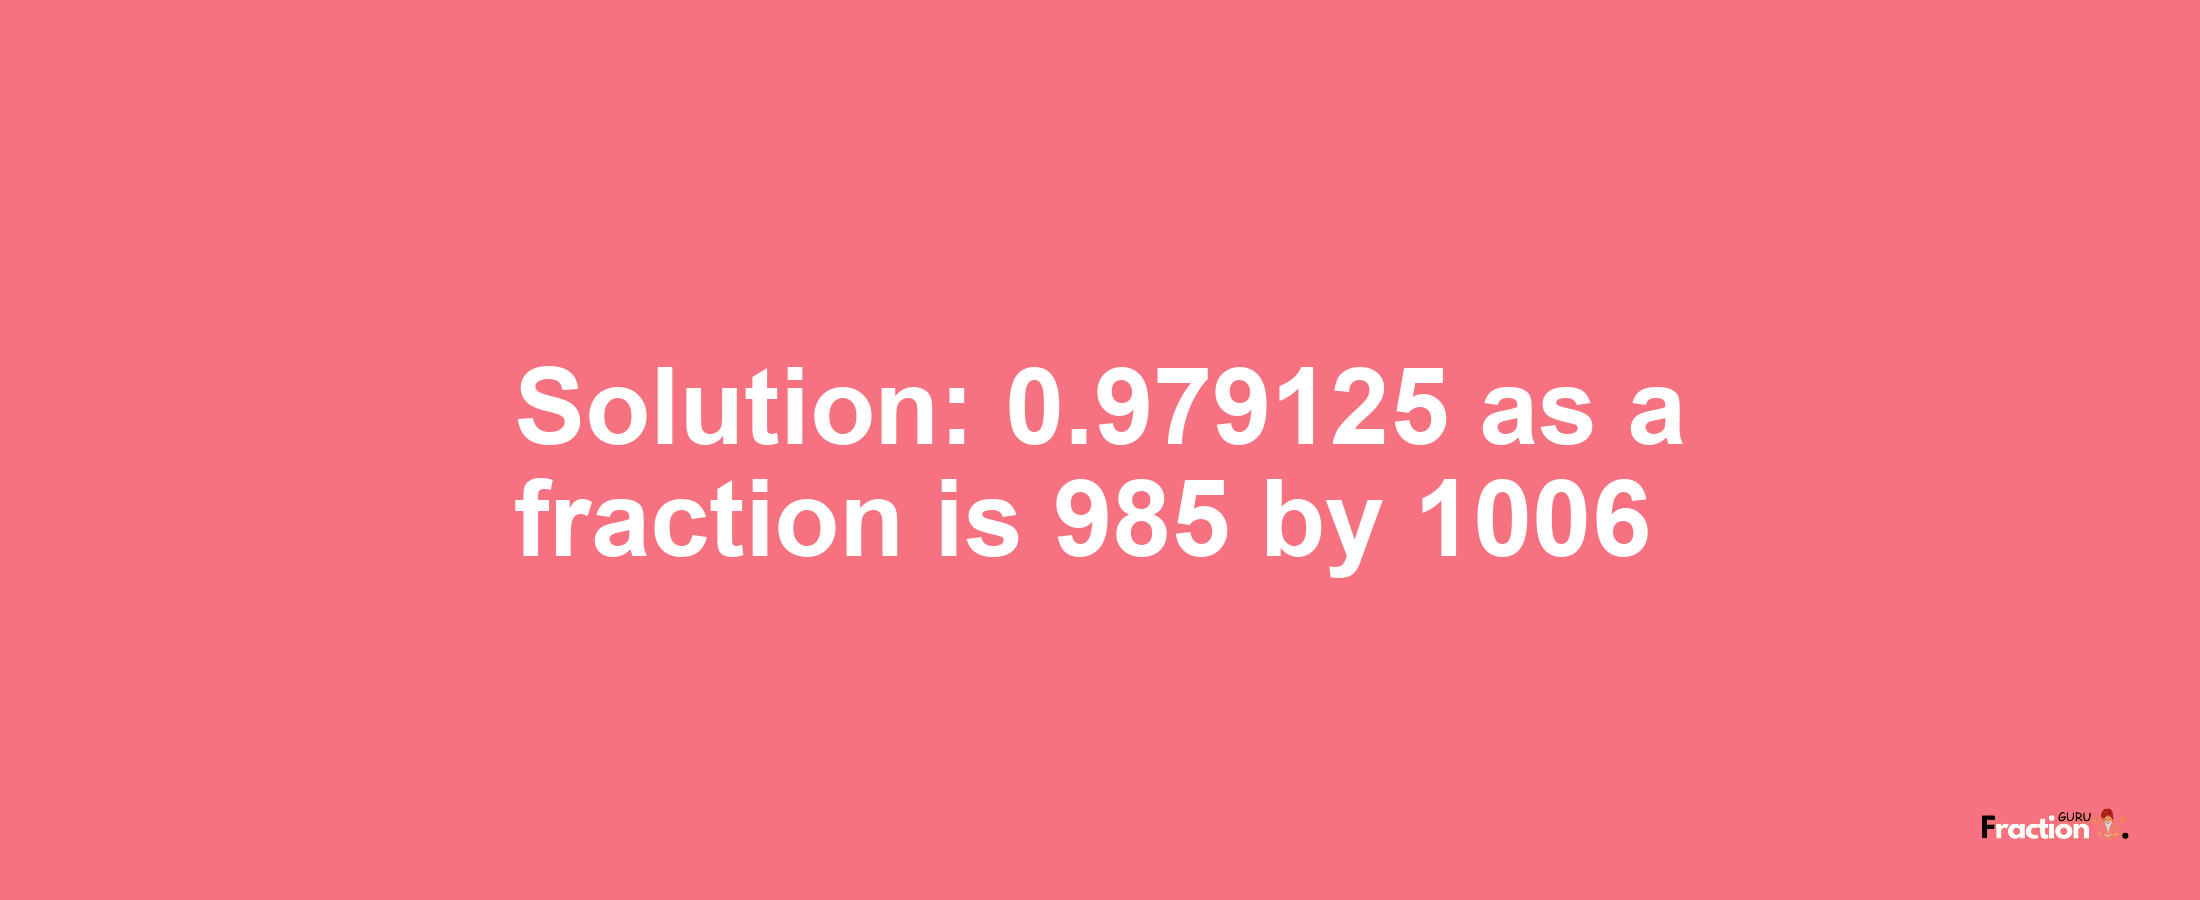 Solution:0.979125 as a fraction is 985/1006